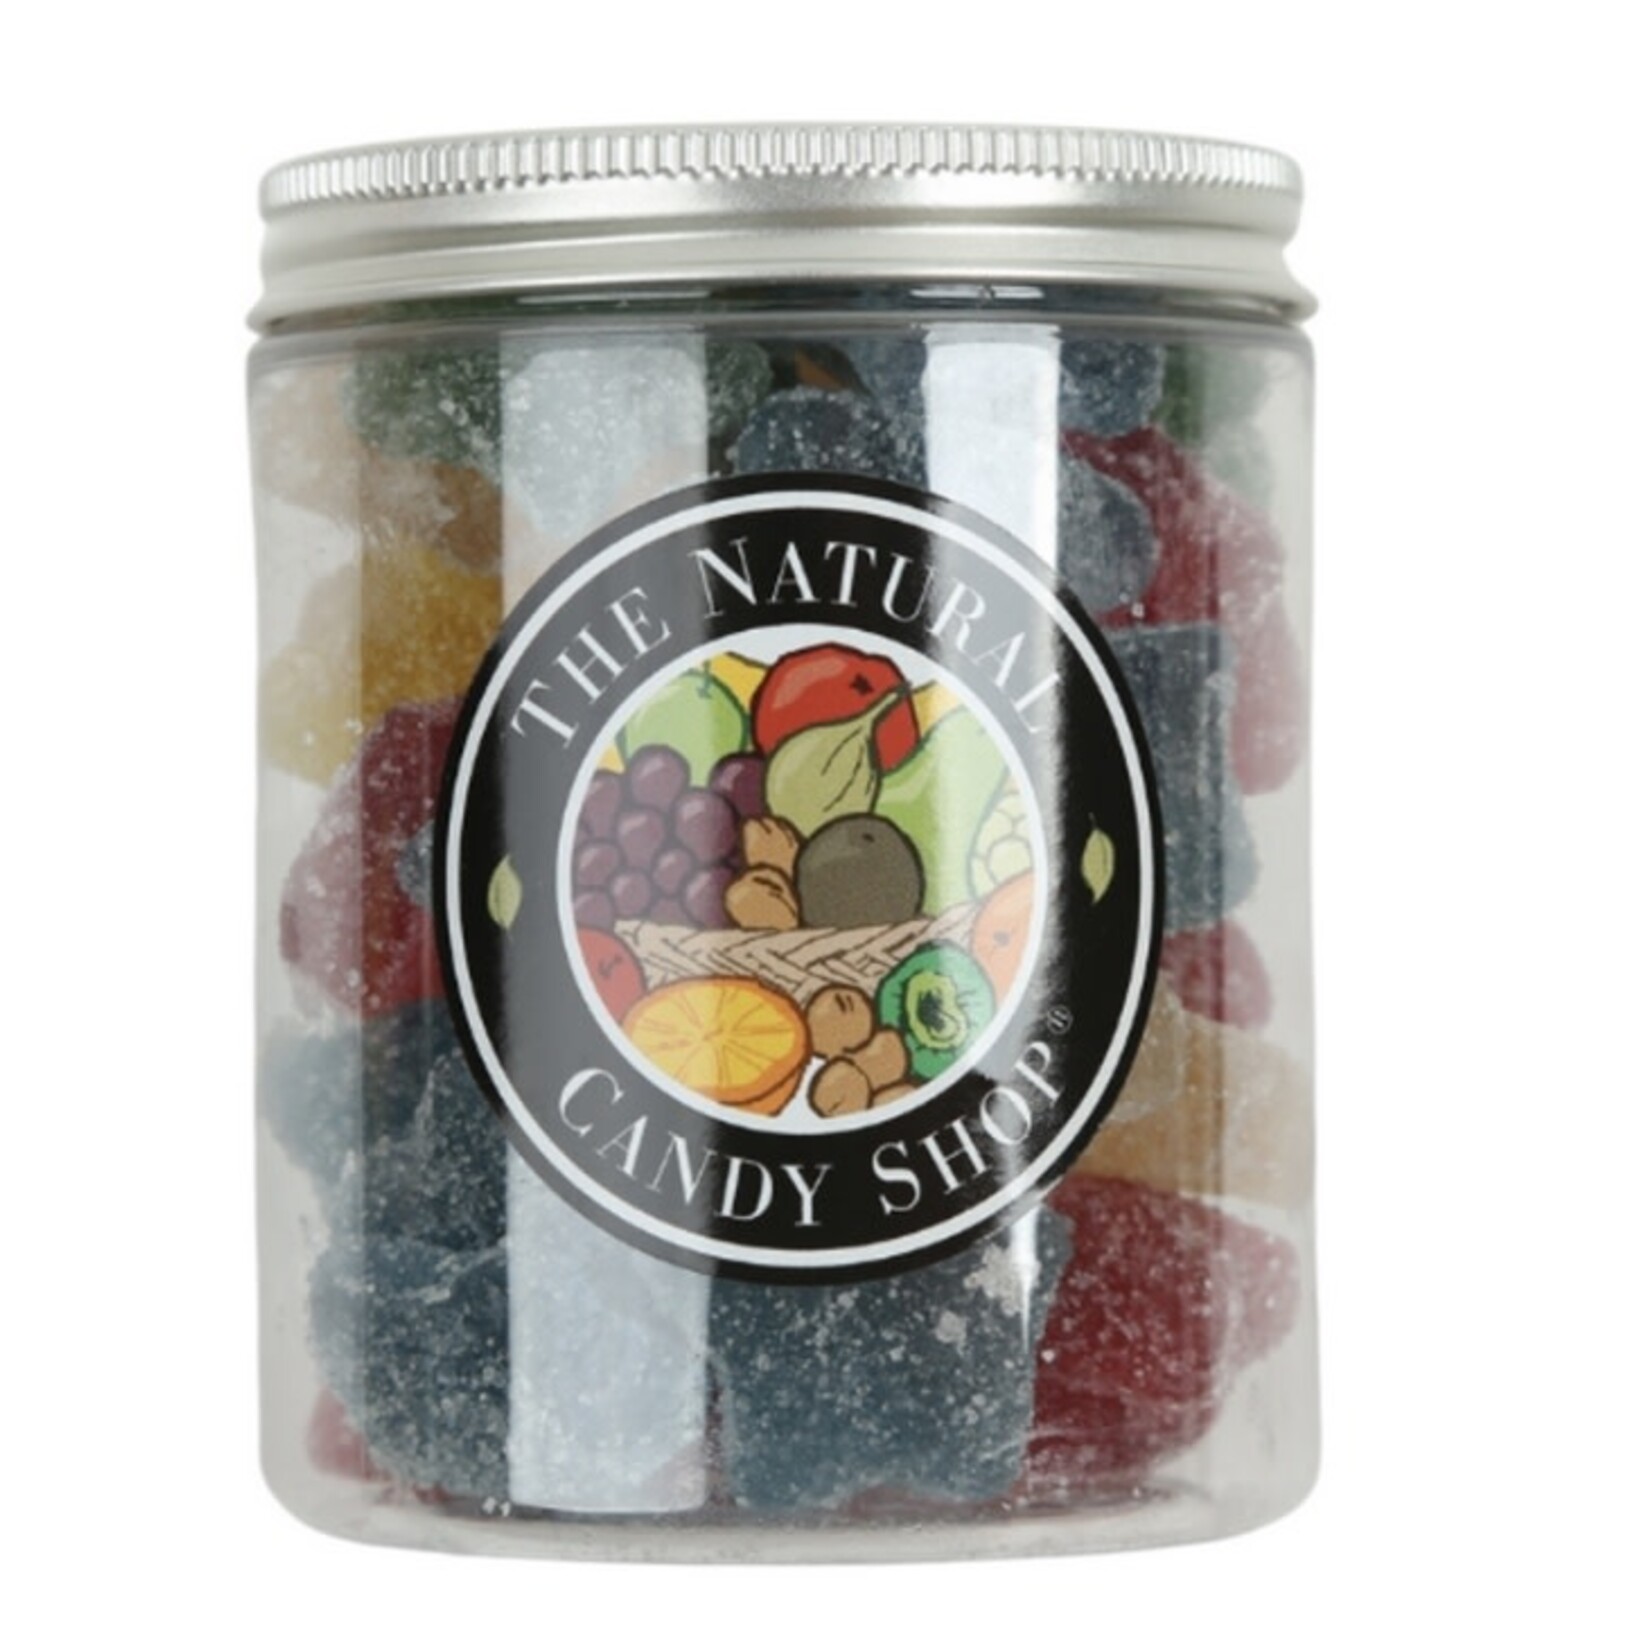 NATURAL CANDY CO. NATURAL CANDY CO. Jelly Stars Jar